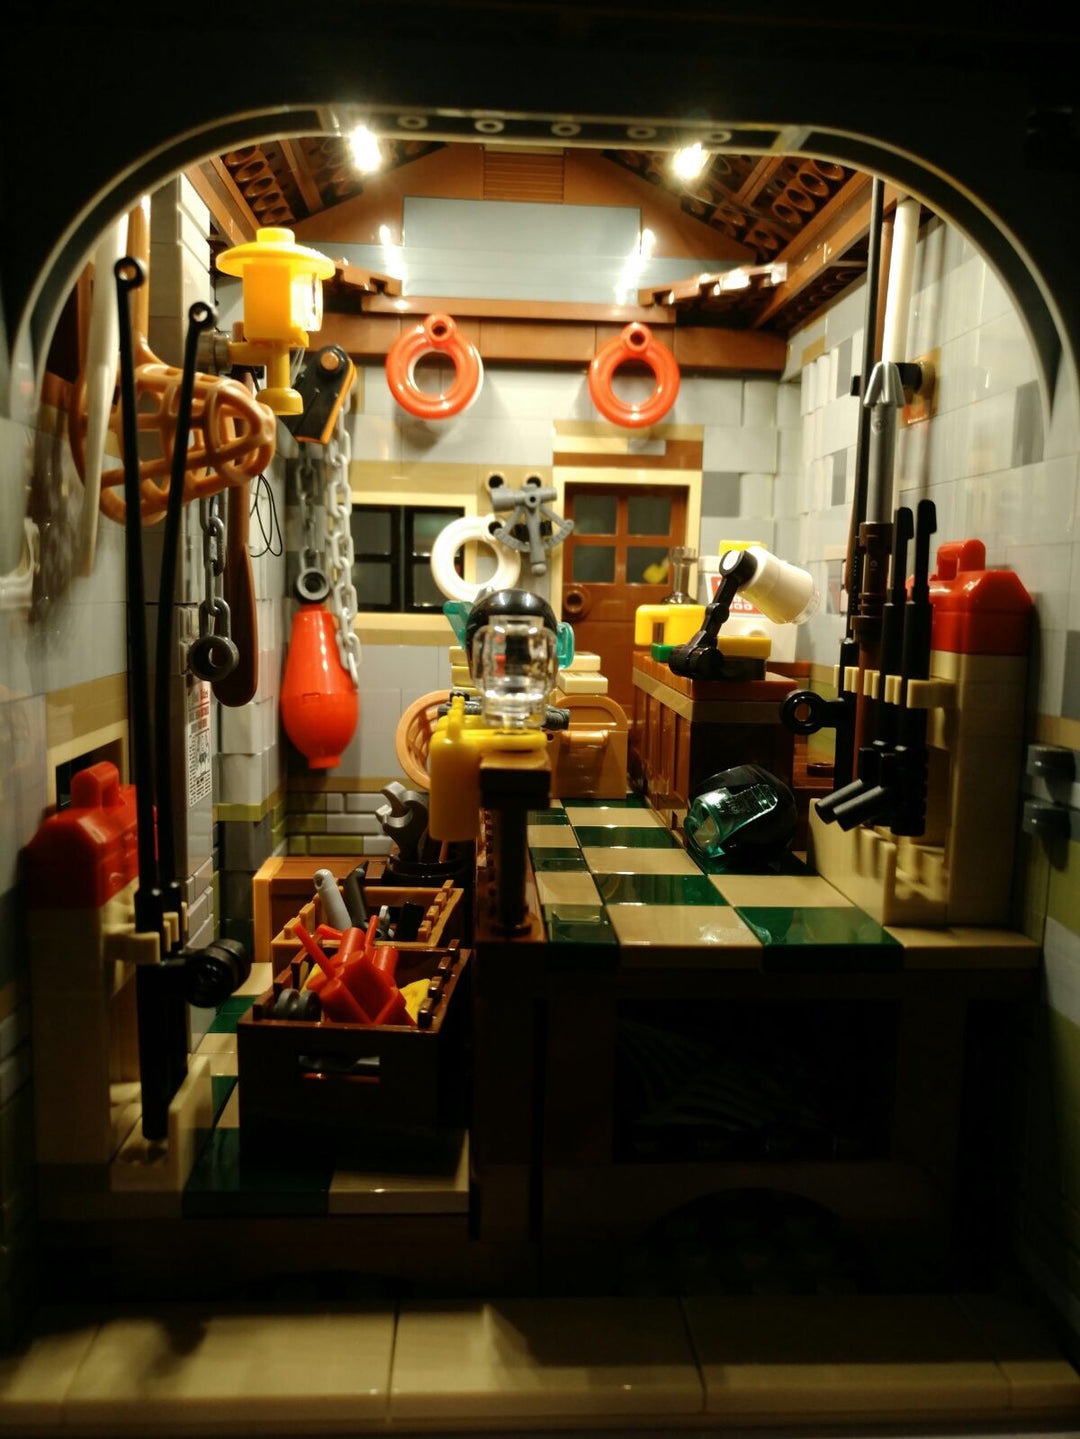 Old-Fishing Store 21310 Lighting Kit (LEGO Set not included) by